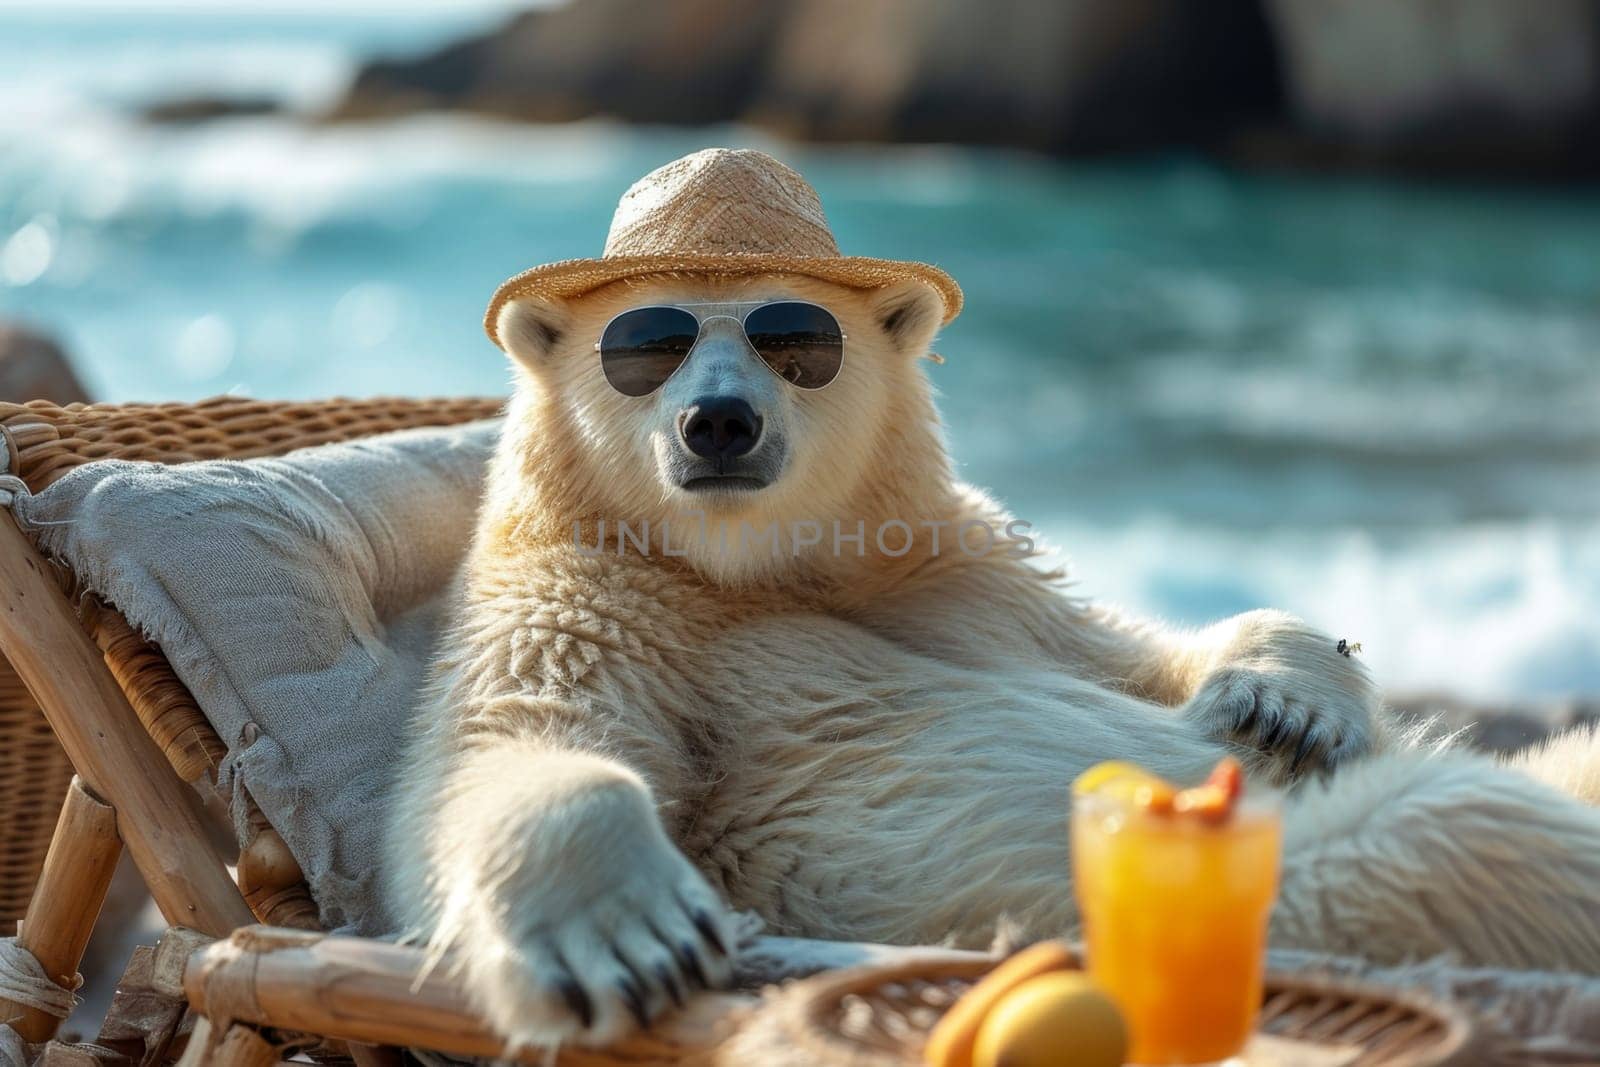 A polar bear in a hat and glasses is relaxing on the beach in a chaise longue drinking orange juice. 3d illustration.